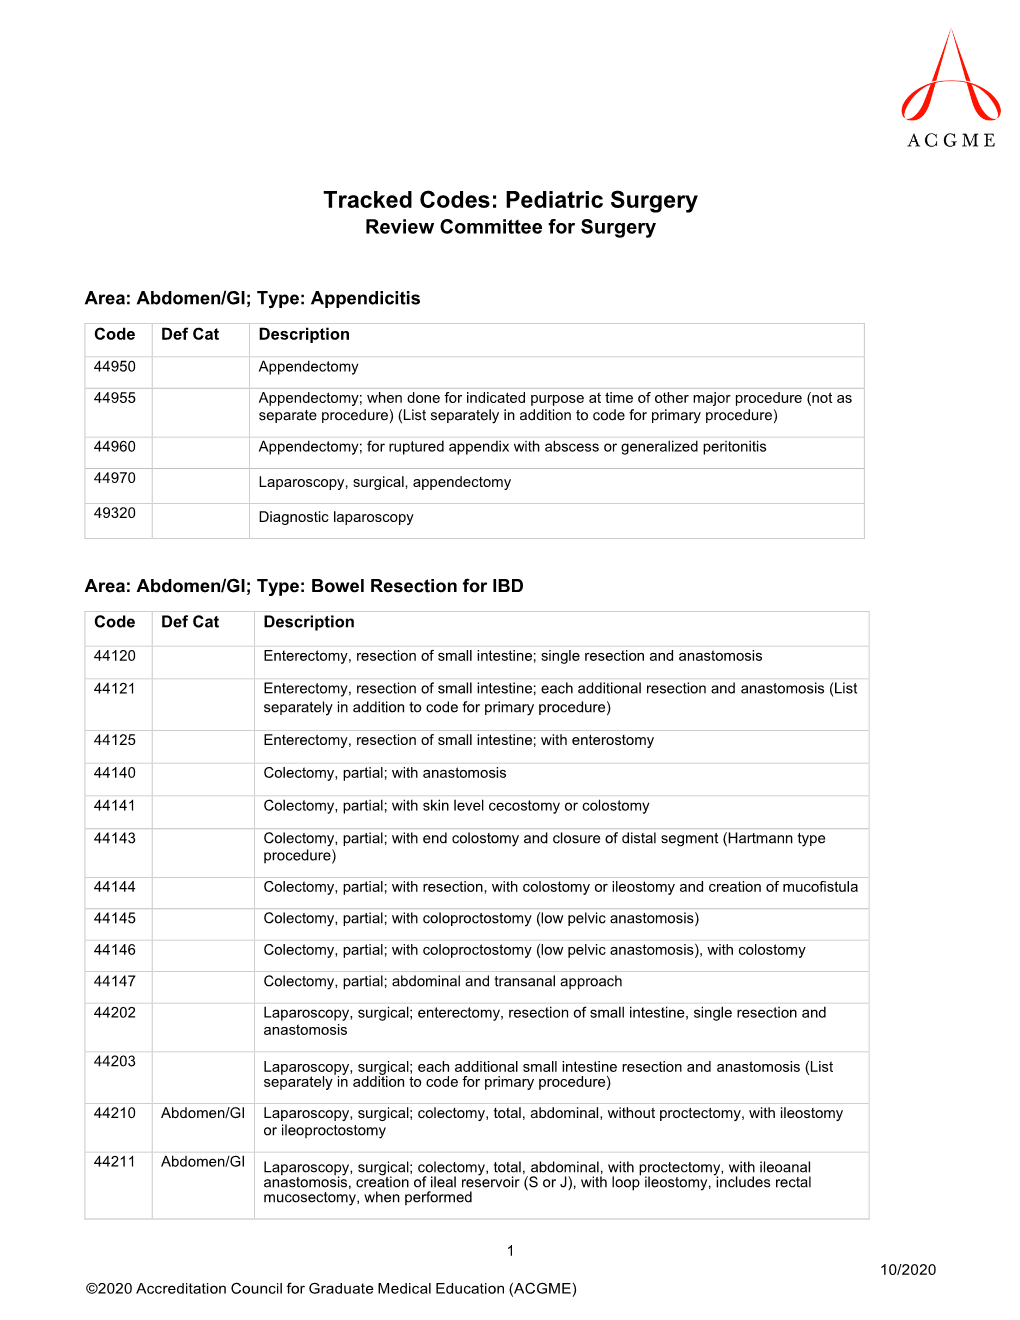 Tracked Codes: Pediatric Surgery Review Committee for Surgery